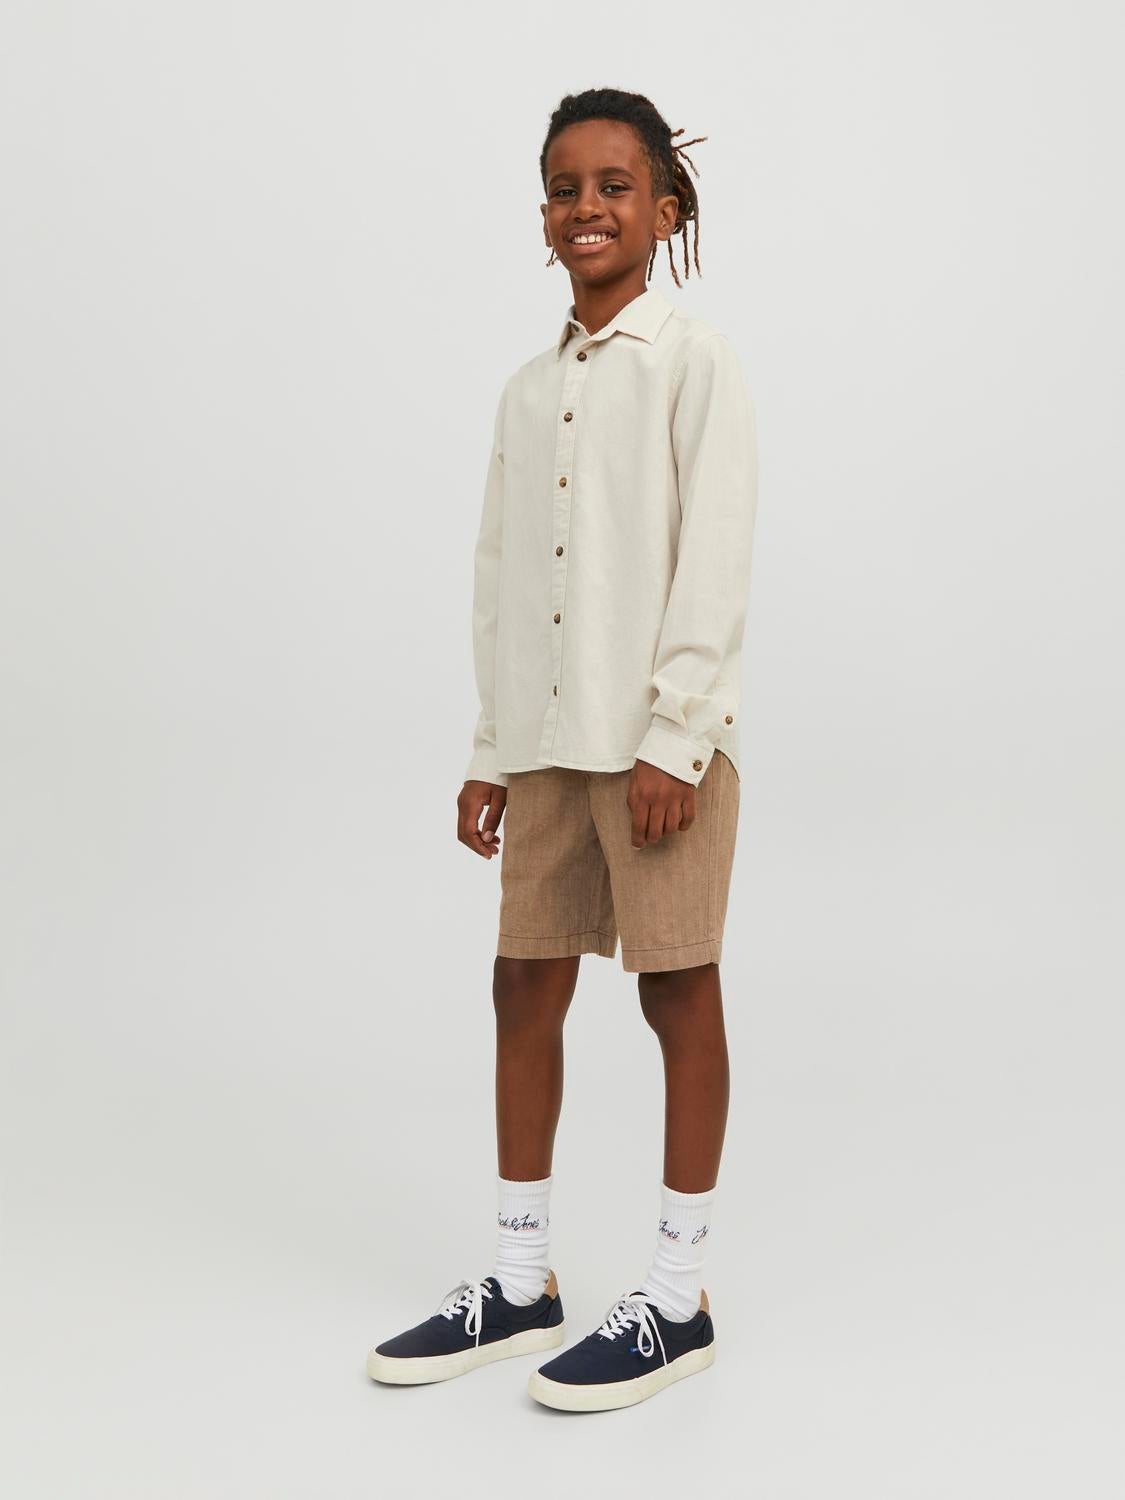 Regular Fit Chino shorts For boys